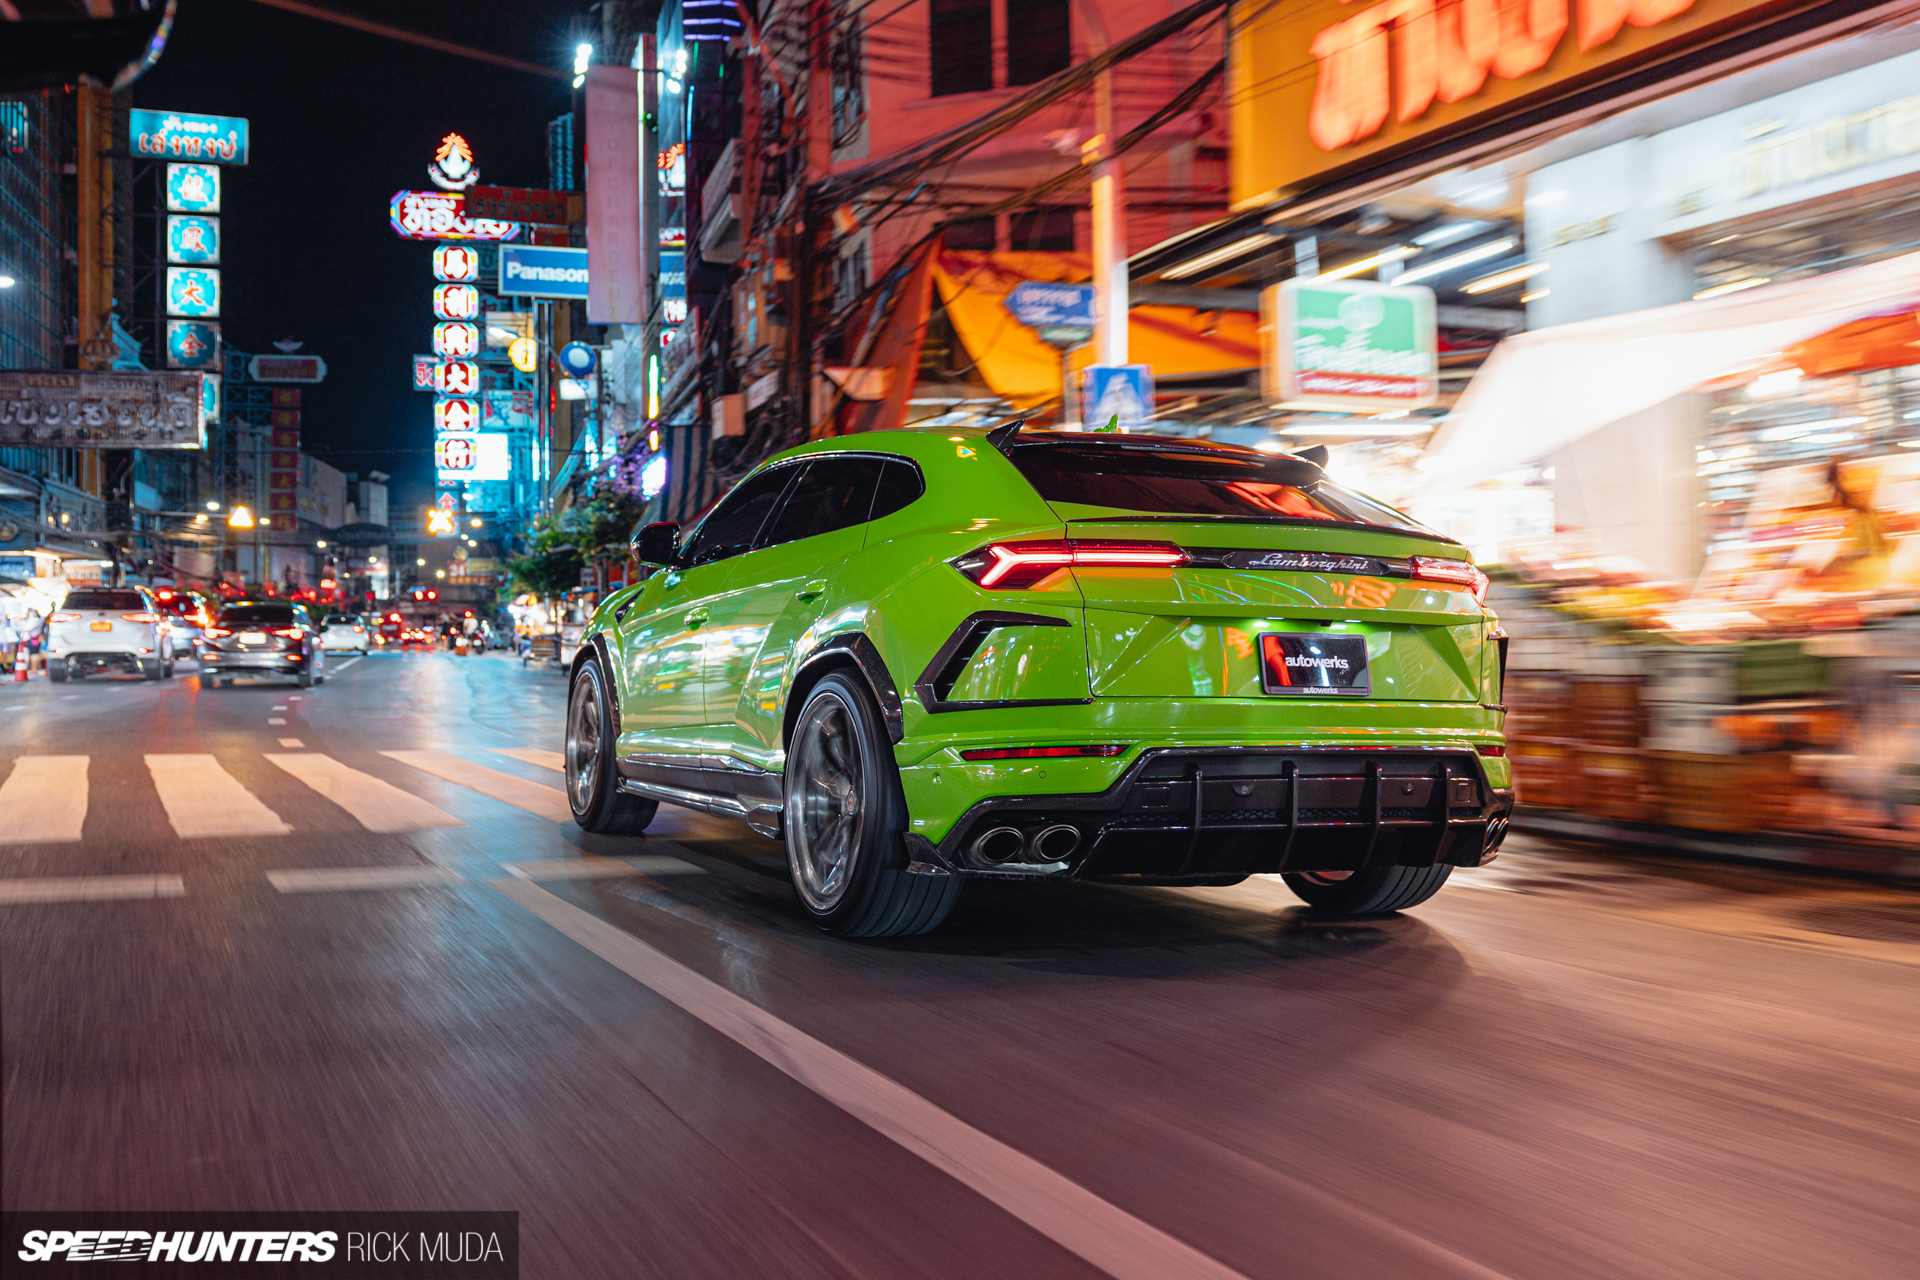 Performante Power Without The Price: The Lamborghini Urus, Cooled By CSF